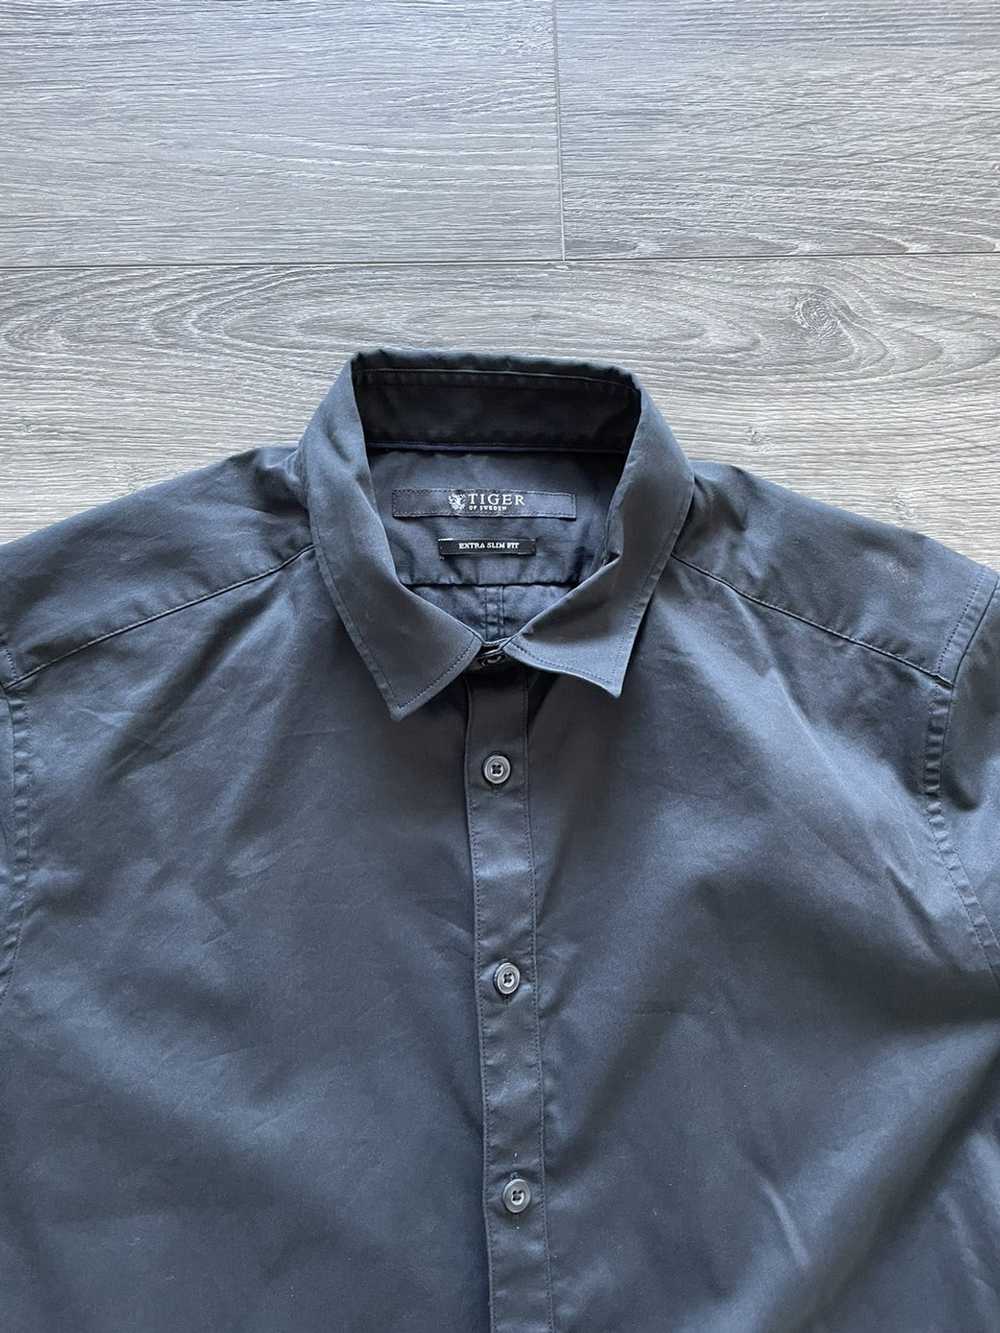 Tiger Of Sweden Black Classic Button Up Shirt - image 4